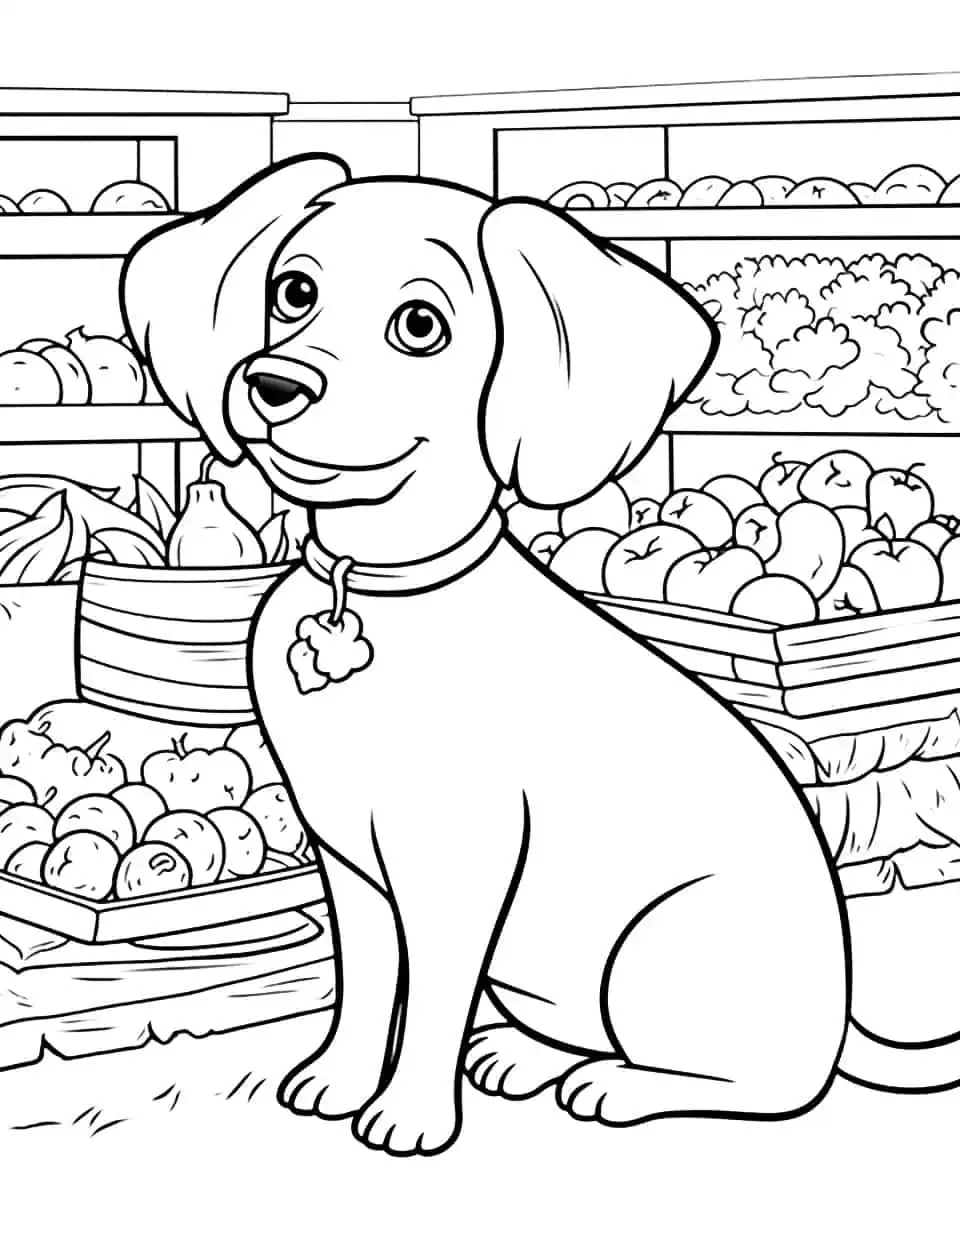 Dachshund at the Market Coloring Page - A Dachshund exploring a local market, sniffing out some fresh produce.